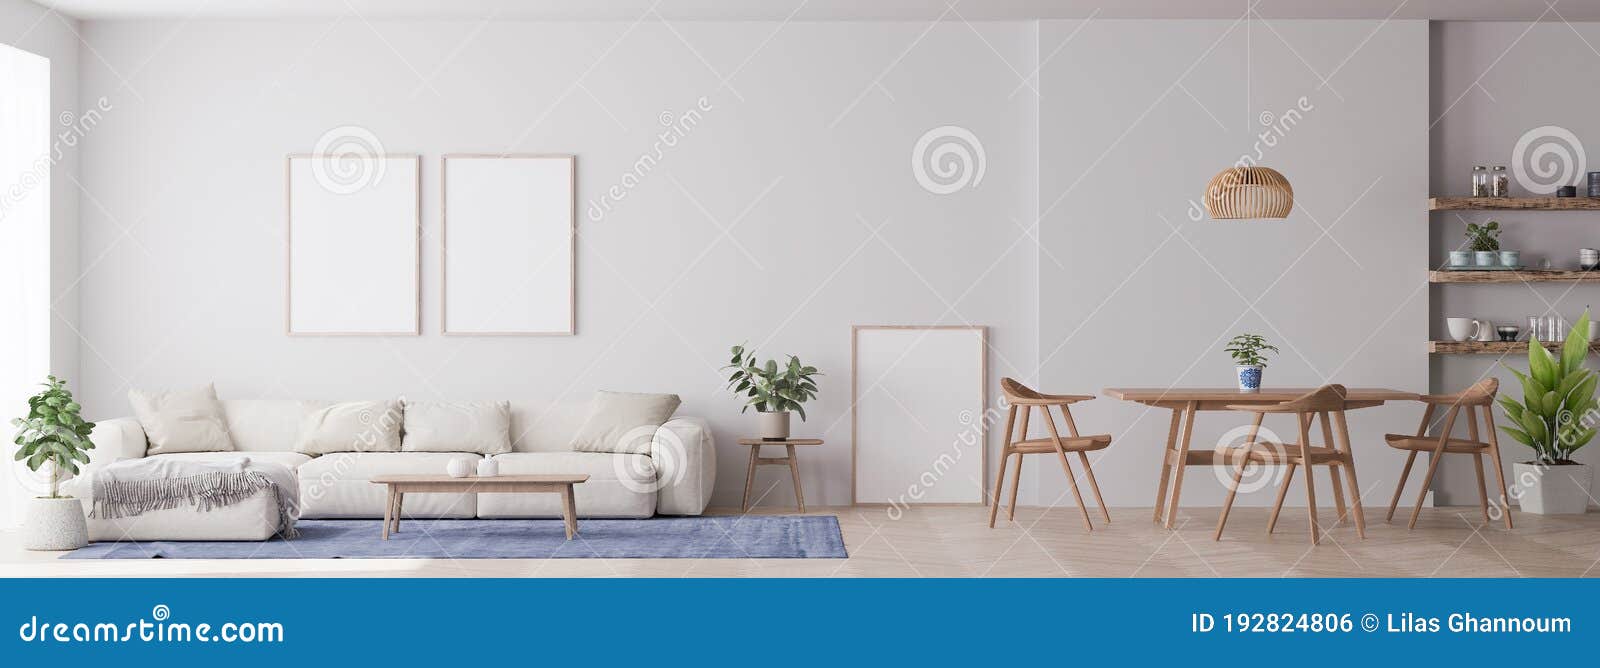 panorama of modern living room with white furniture and dining area